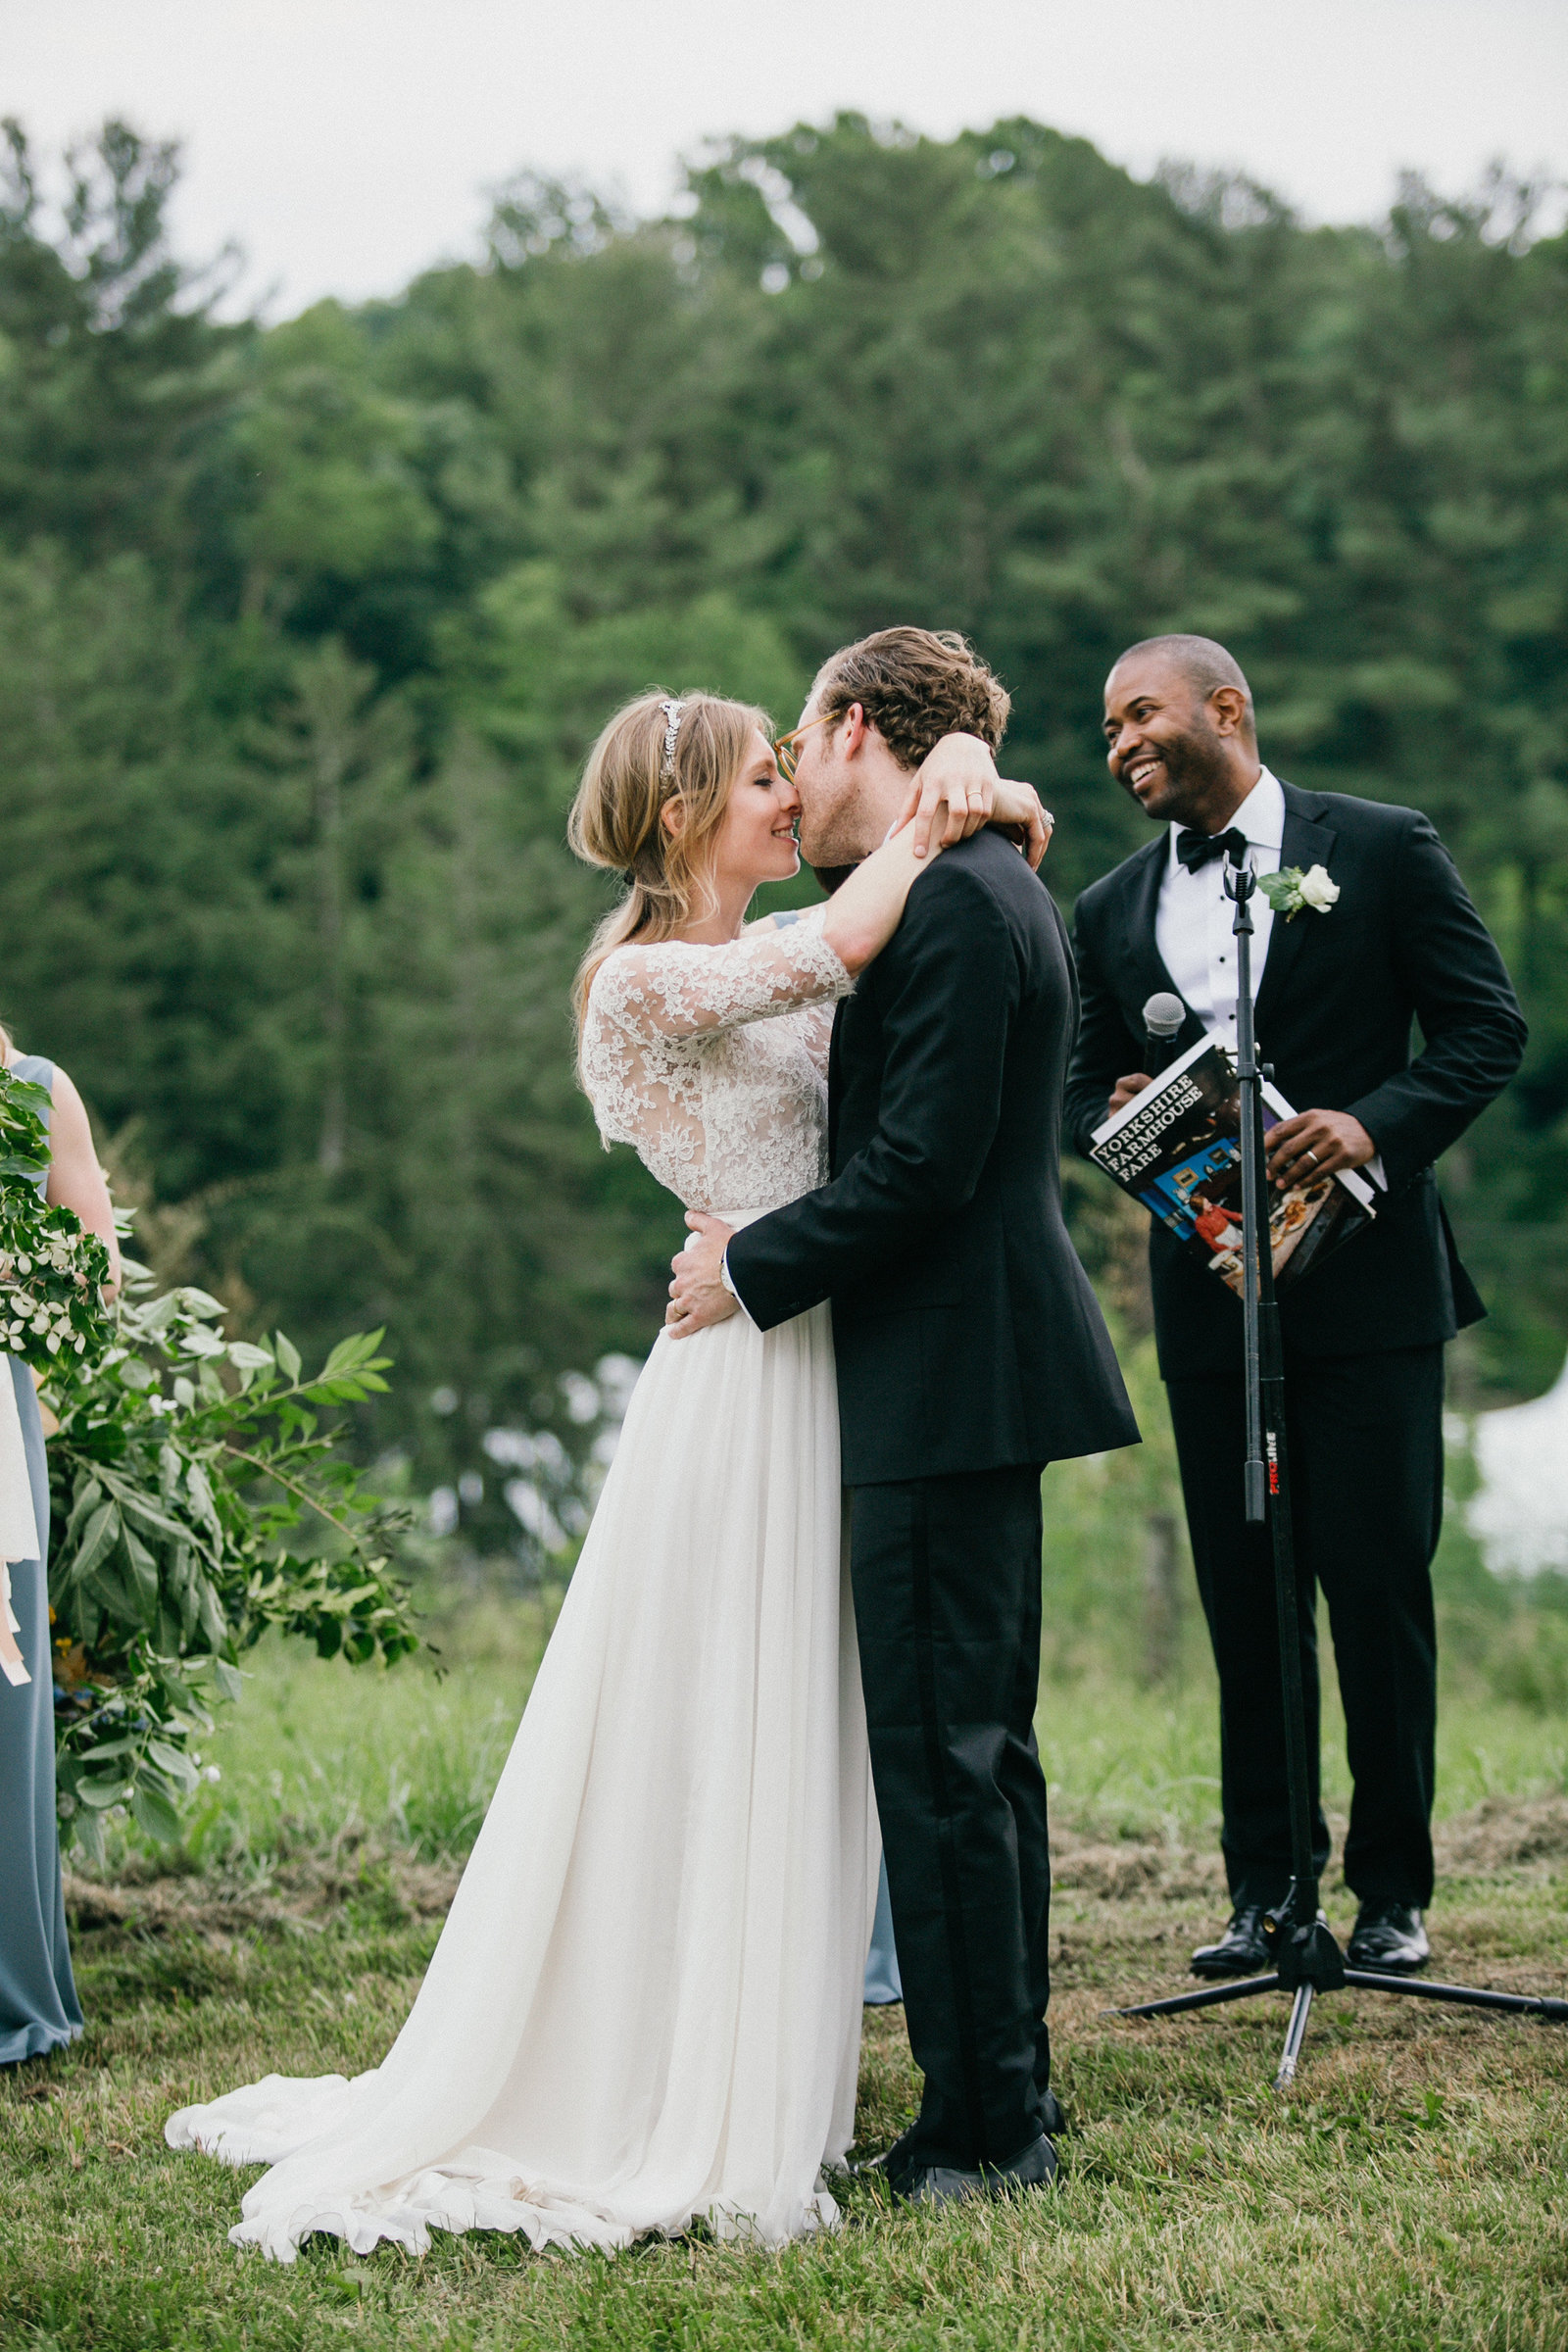 Newly wed couple share a kiss, in front of close family and friends